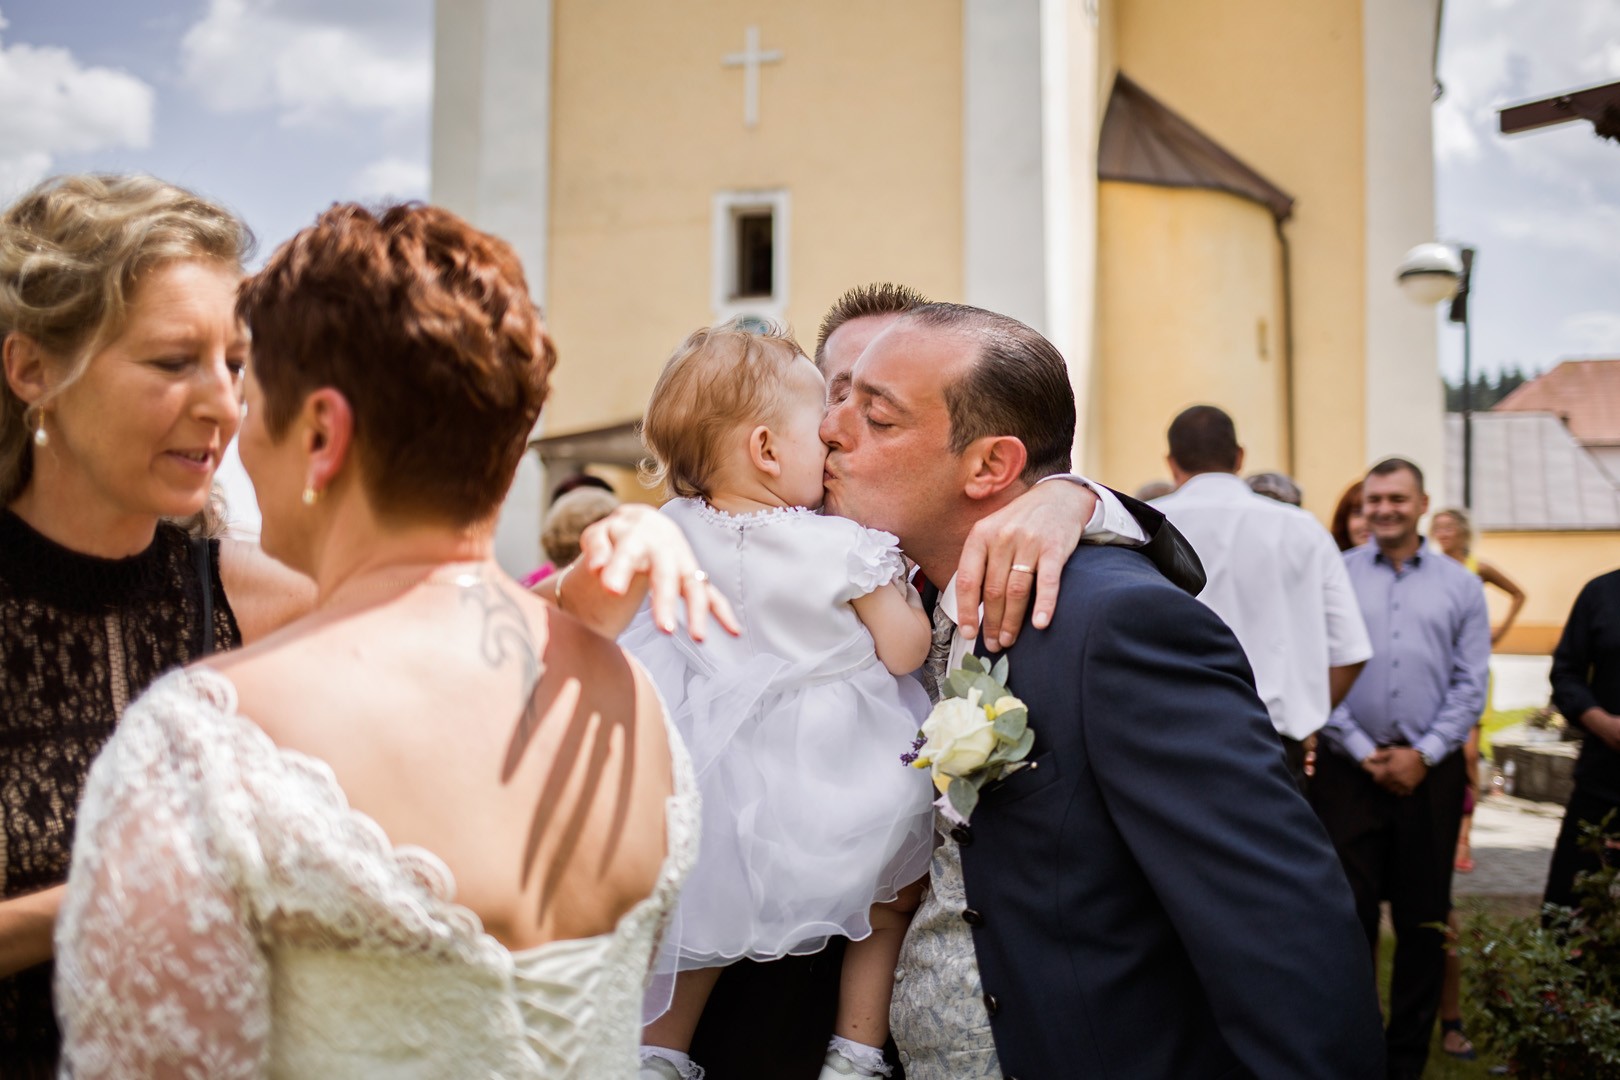 Wedding photos from the Slovak-Italian wedding of Mirka and Baldy in the beautiful surroundings of the Gbeľany Manor House - 0157.jpg